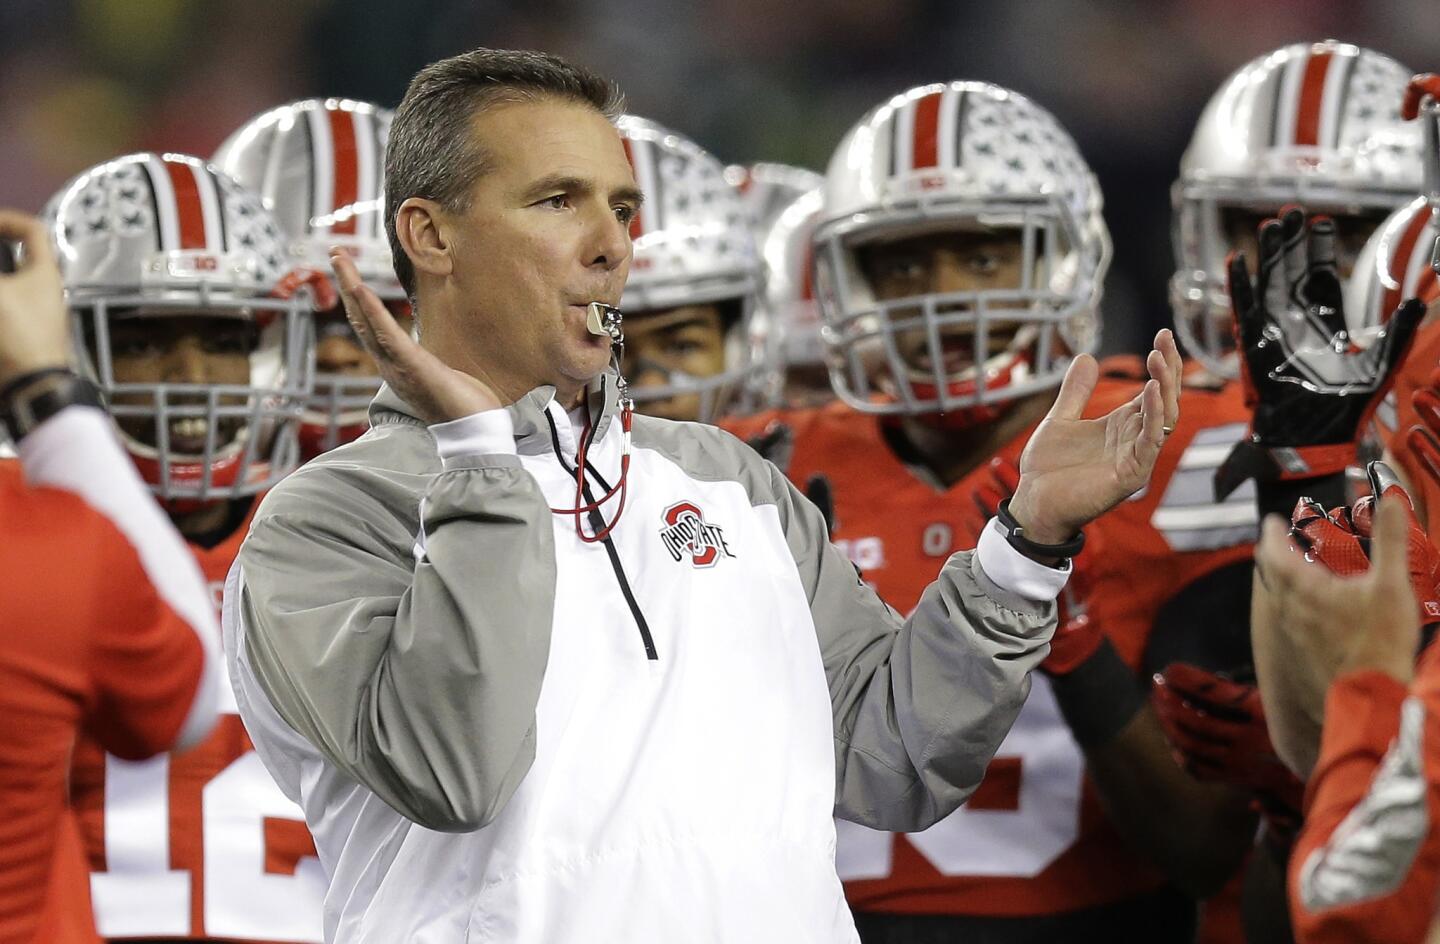 Ohio State head coach Urban Meyer rallies his players before the NCAA college football playoff championship game against Oregon Monday, Jan. 12, 2015, in Arlington, Texas. (AP Photo/Eric Gay)